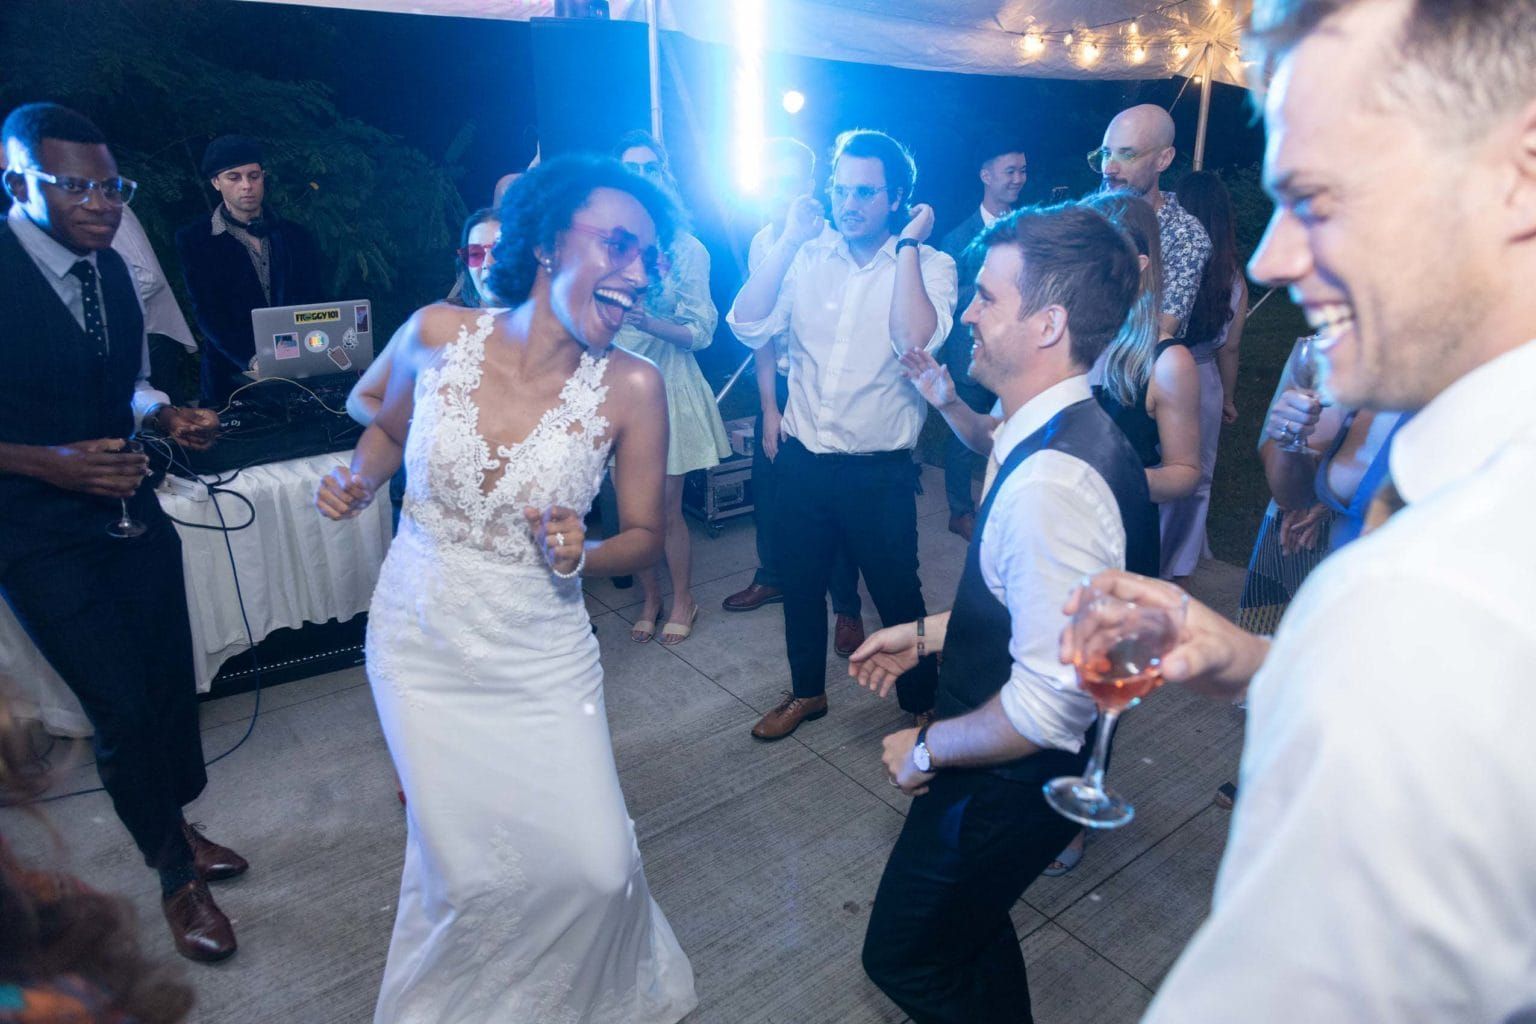 A bride and groom are dancing at a wedding reception with their guests.